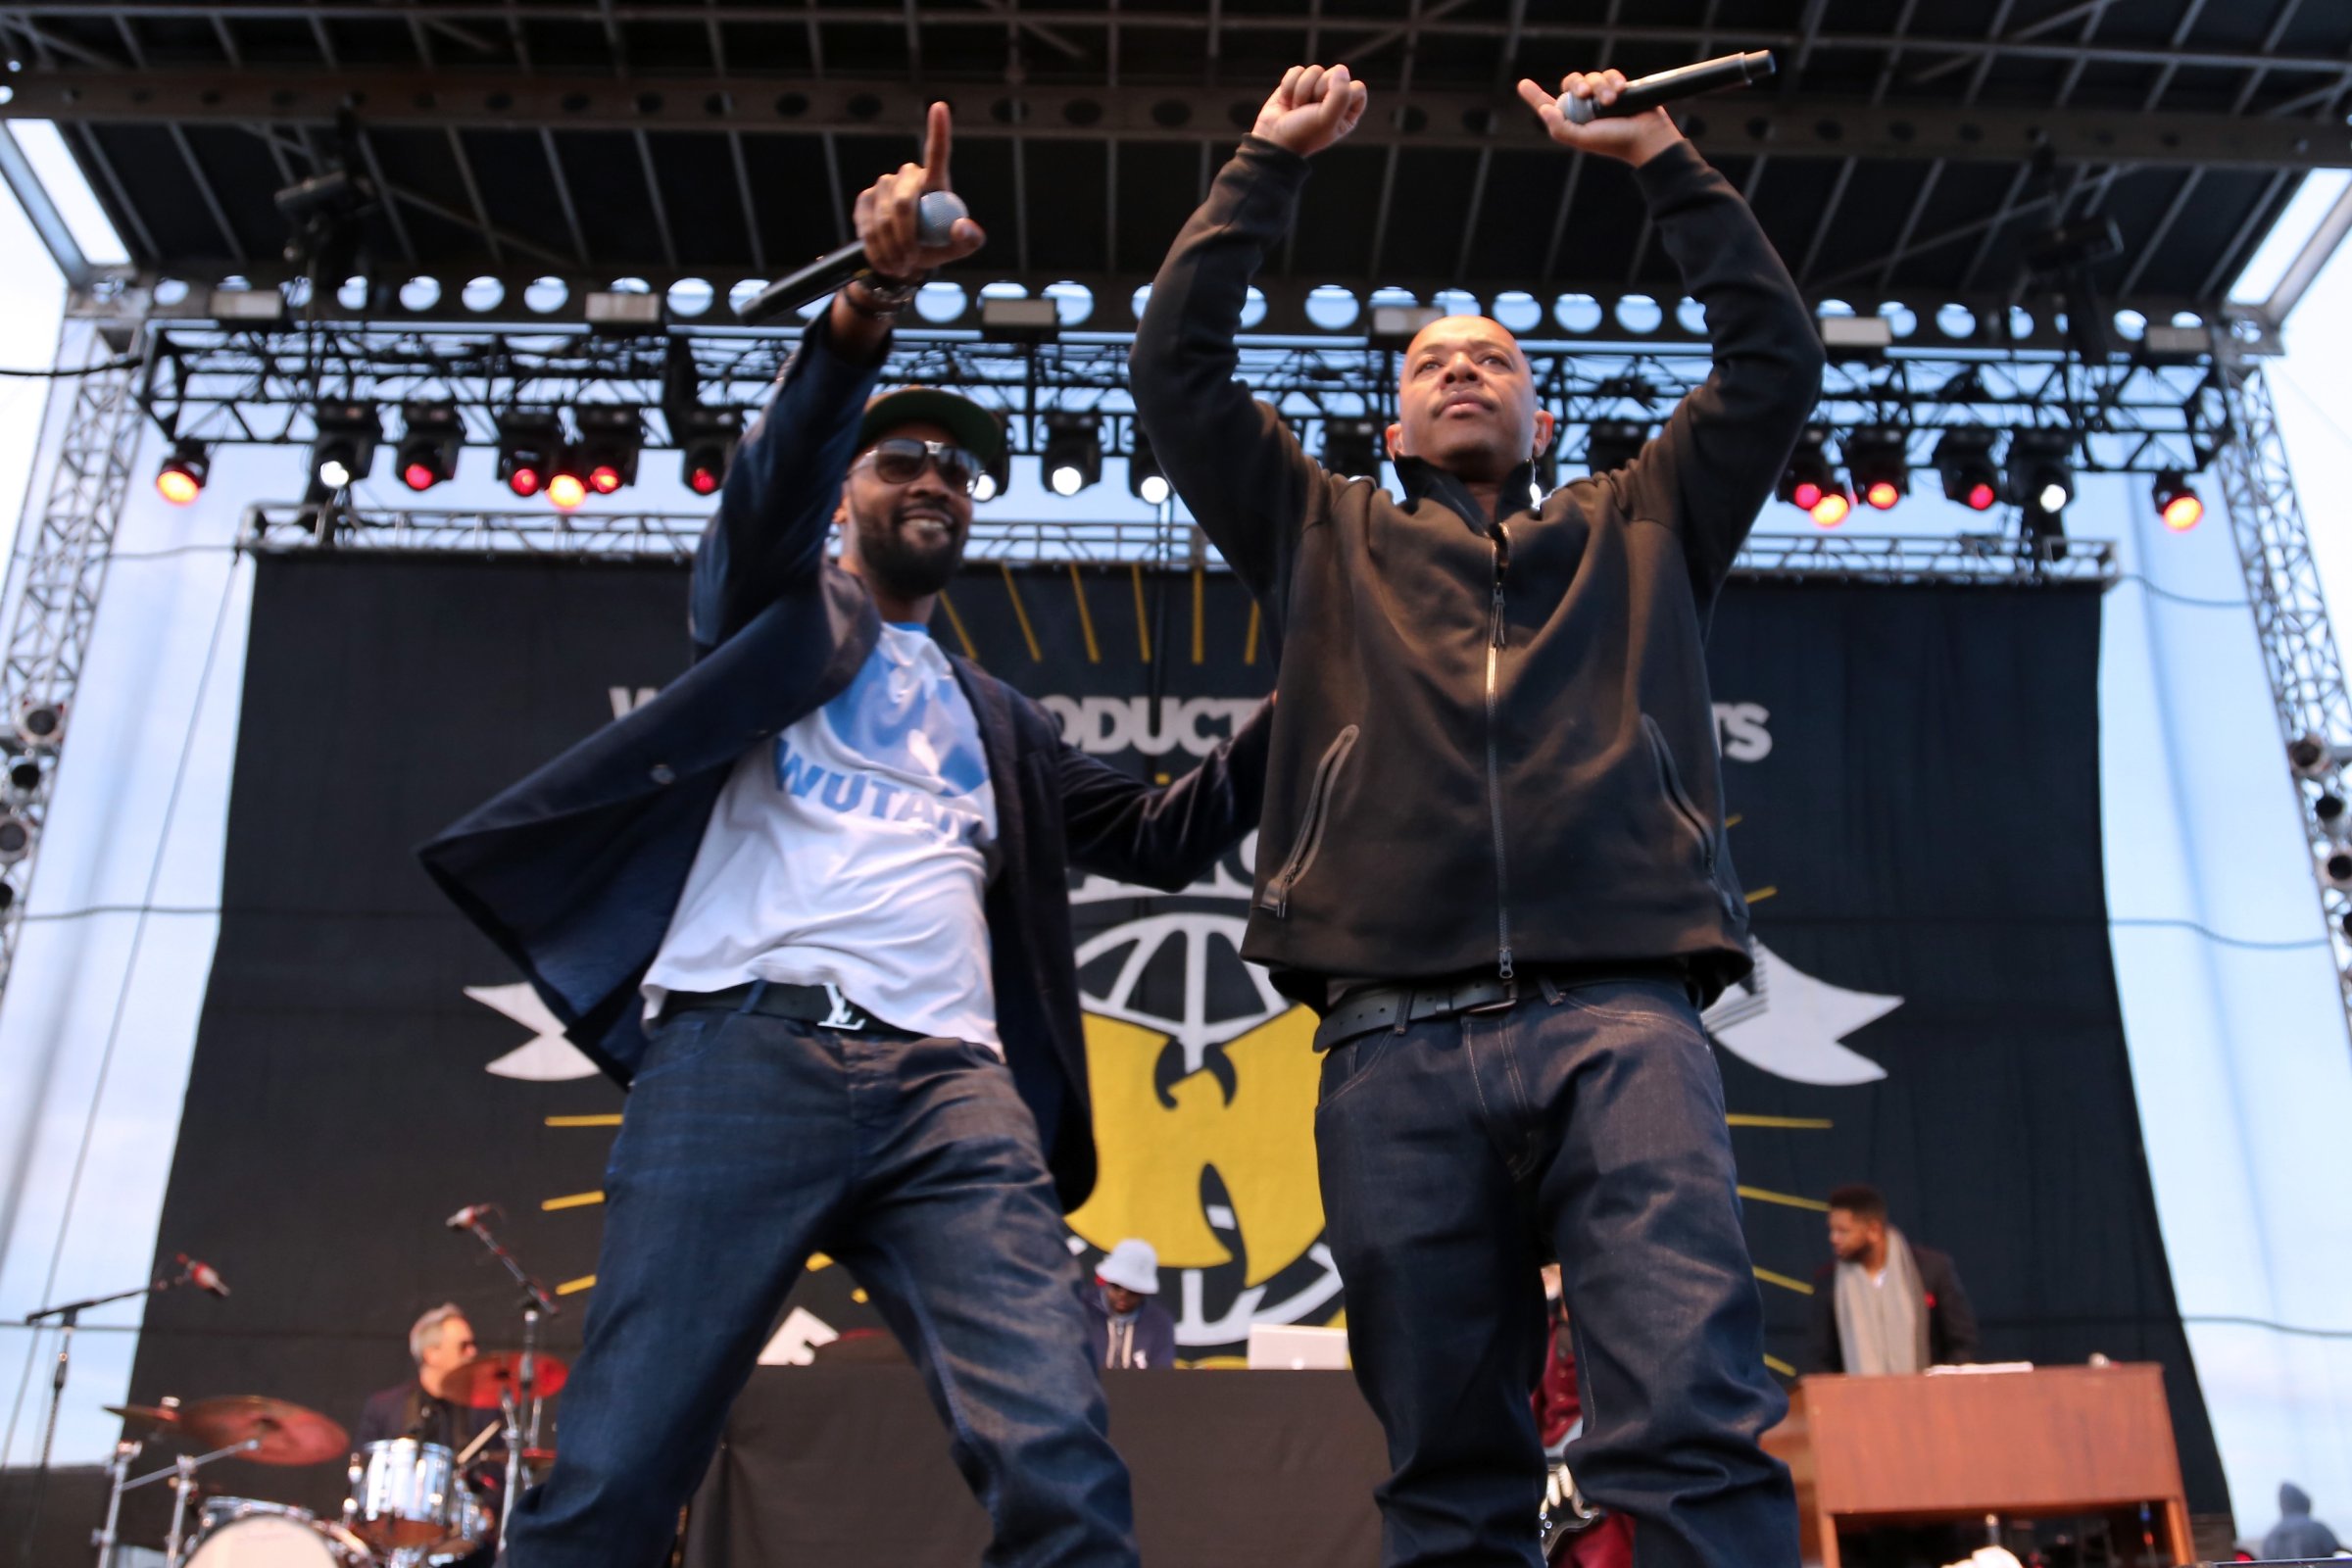 RZA and U-God of Wu-Tang Clan perform on stage during the 2015 Riot Fest at Downsview Park on September 20, 2015 in Toronto.